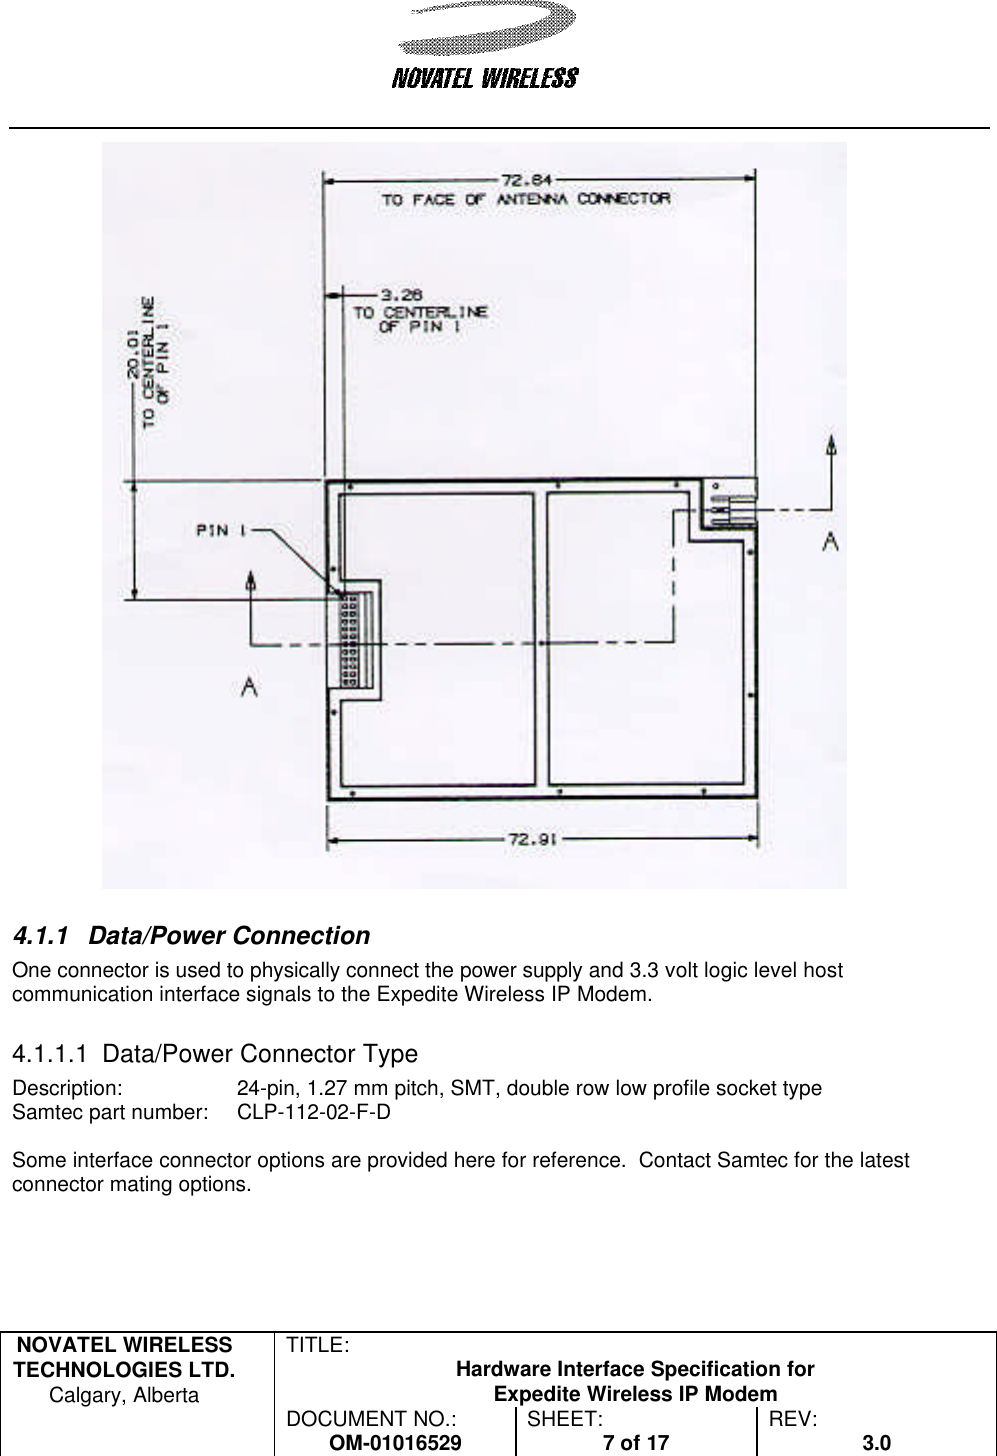   NOVATEL WIRELESS TECHNOLOGIES LTD.  Calgary, Alberta TITLE: Hardware Interface Specification for Expedite Wireless IP Modem  DOCUMENT NO.: OM-01016529 SHEET: 7 of 17 REV: 3.0    4.1.1 Data/Power Connection One connector is used to physically connect the power supply and 3.3 volt logic level host communication interface signals to the Expedite Wireless IP Modem.  4.1.1.1 Data/Power Connector Type Description:  24-pin, 1.27 mm pitch, SMT, double row low profile socket type Samtec part number:  CLP-112-02-F-D  Some interface connector options are provided here for reference.  Contact Samtec for the latest connector mating options.  